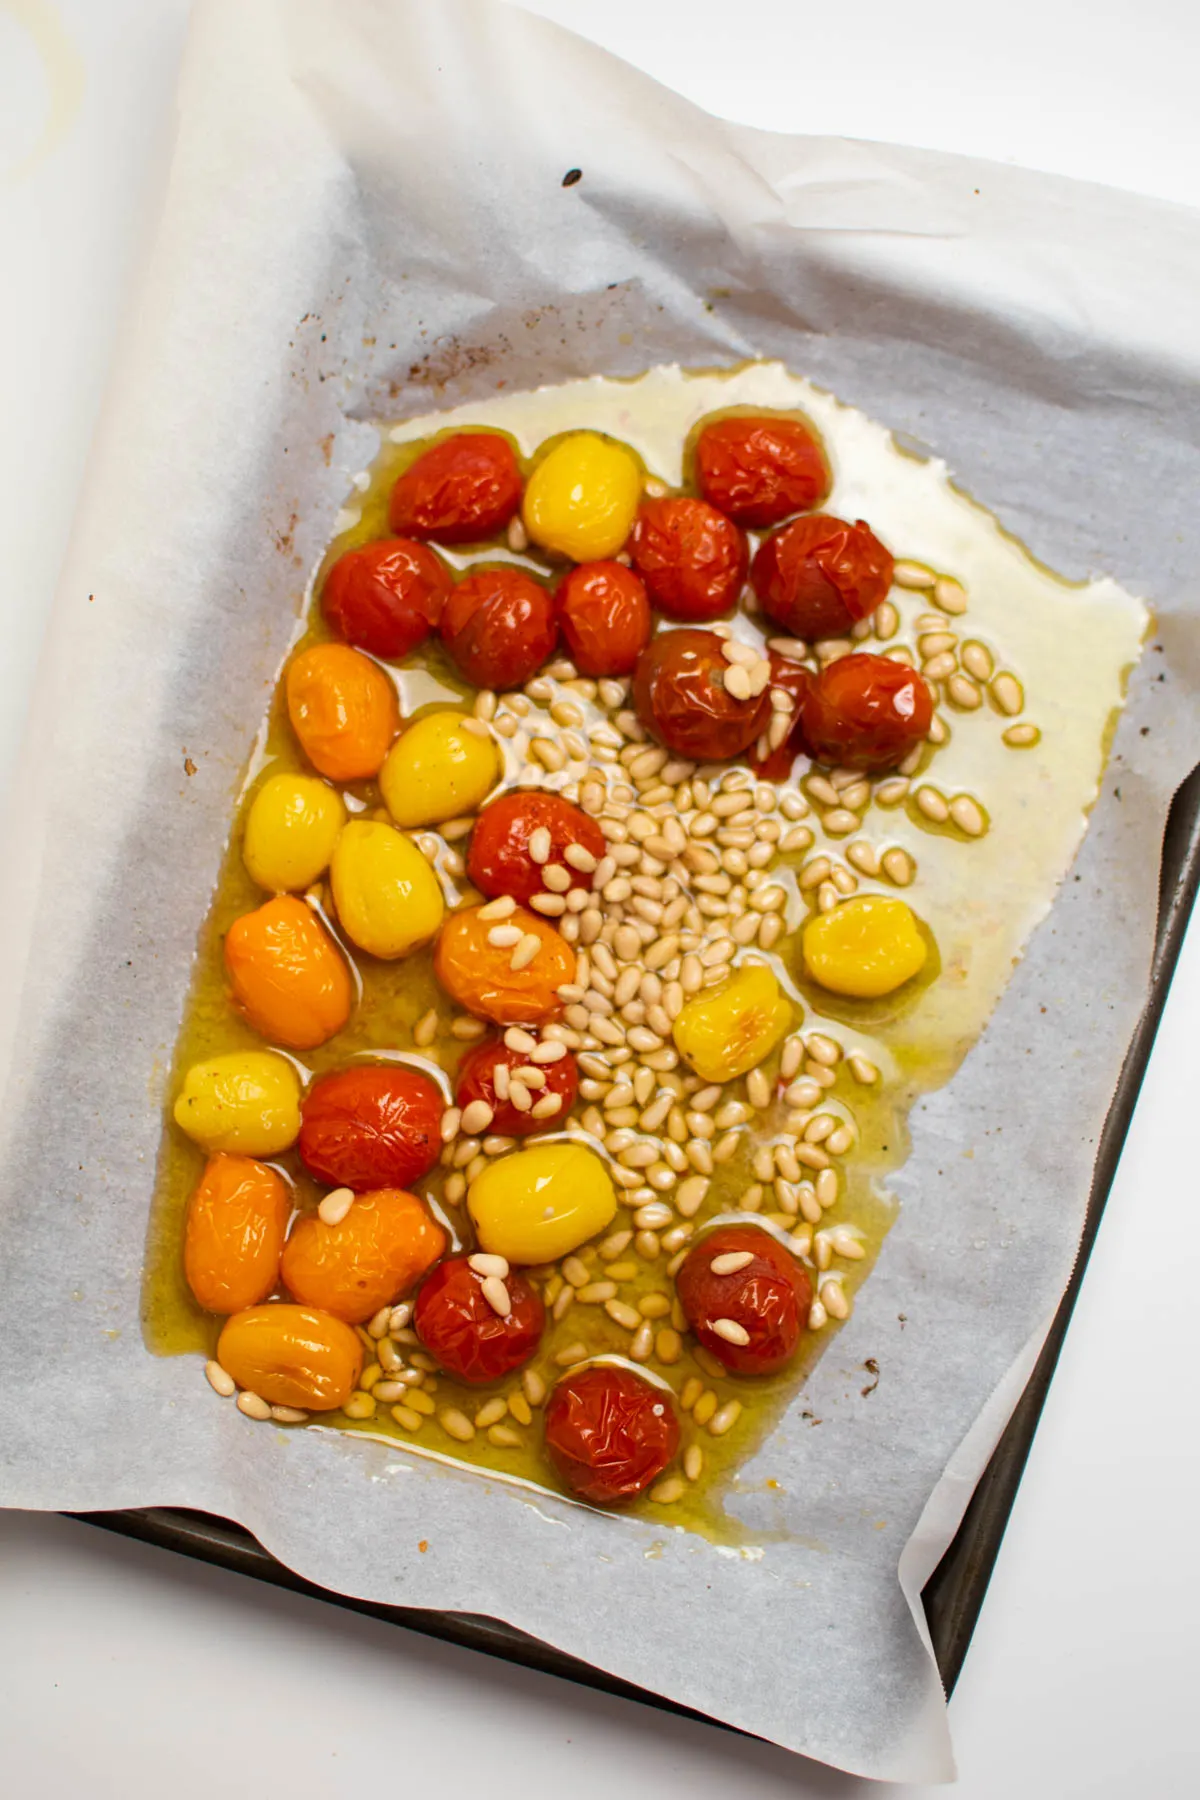 Roasted cherry tomatoes and pine nuts in olive oil on parchment lined baking sheet.